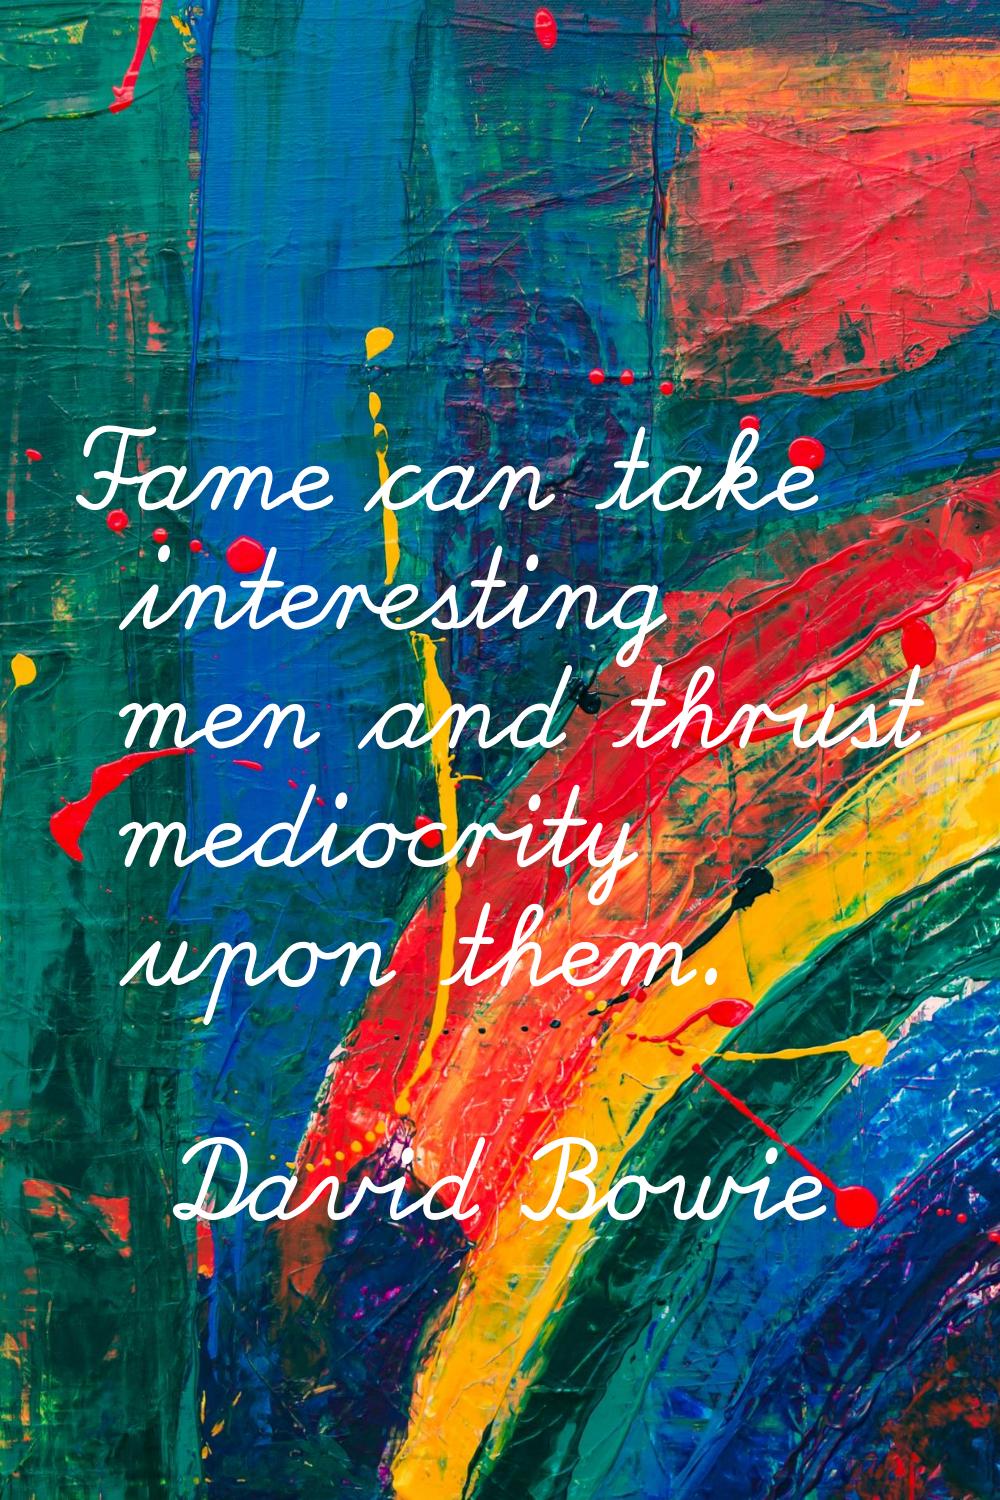 Fame can take interesting men and thrust mediocrity upon them.